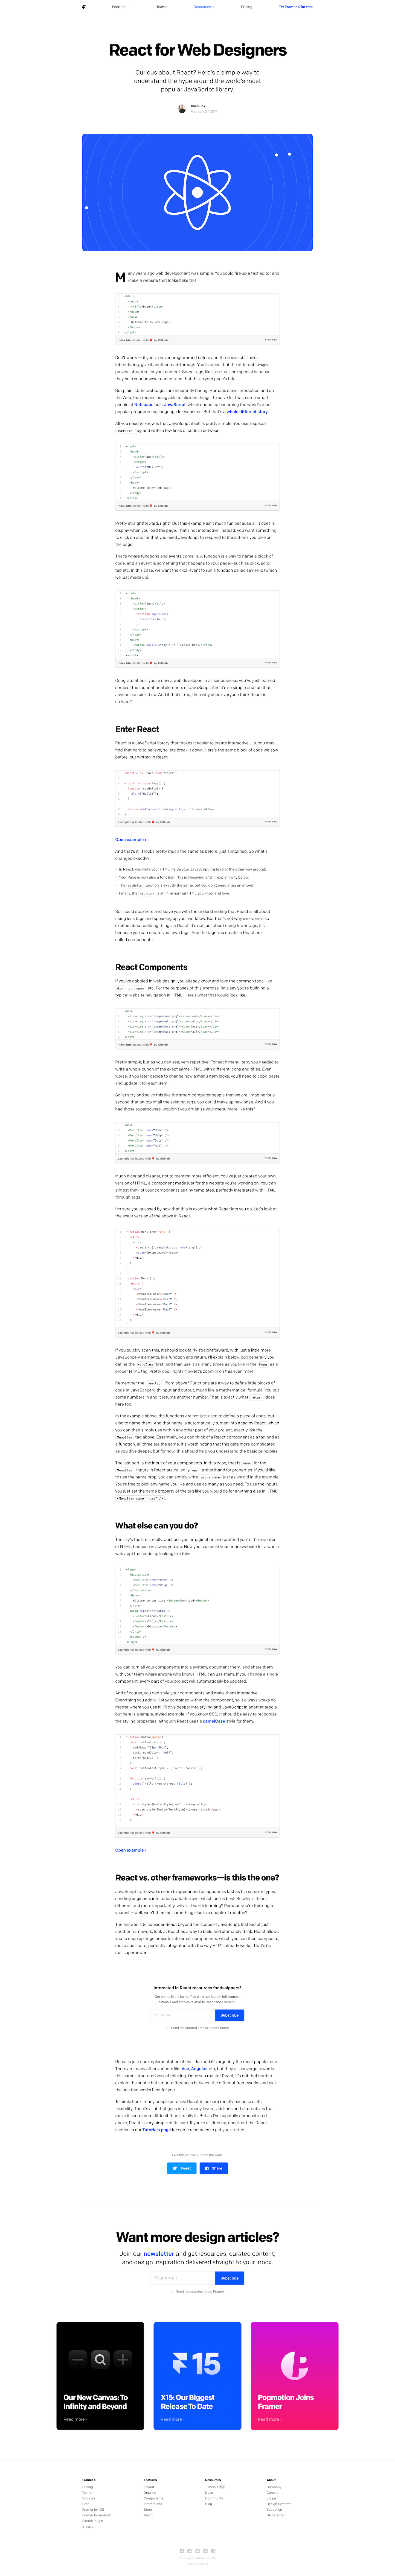 Screenshot of the Blog - Article page from the Framer website.